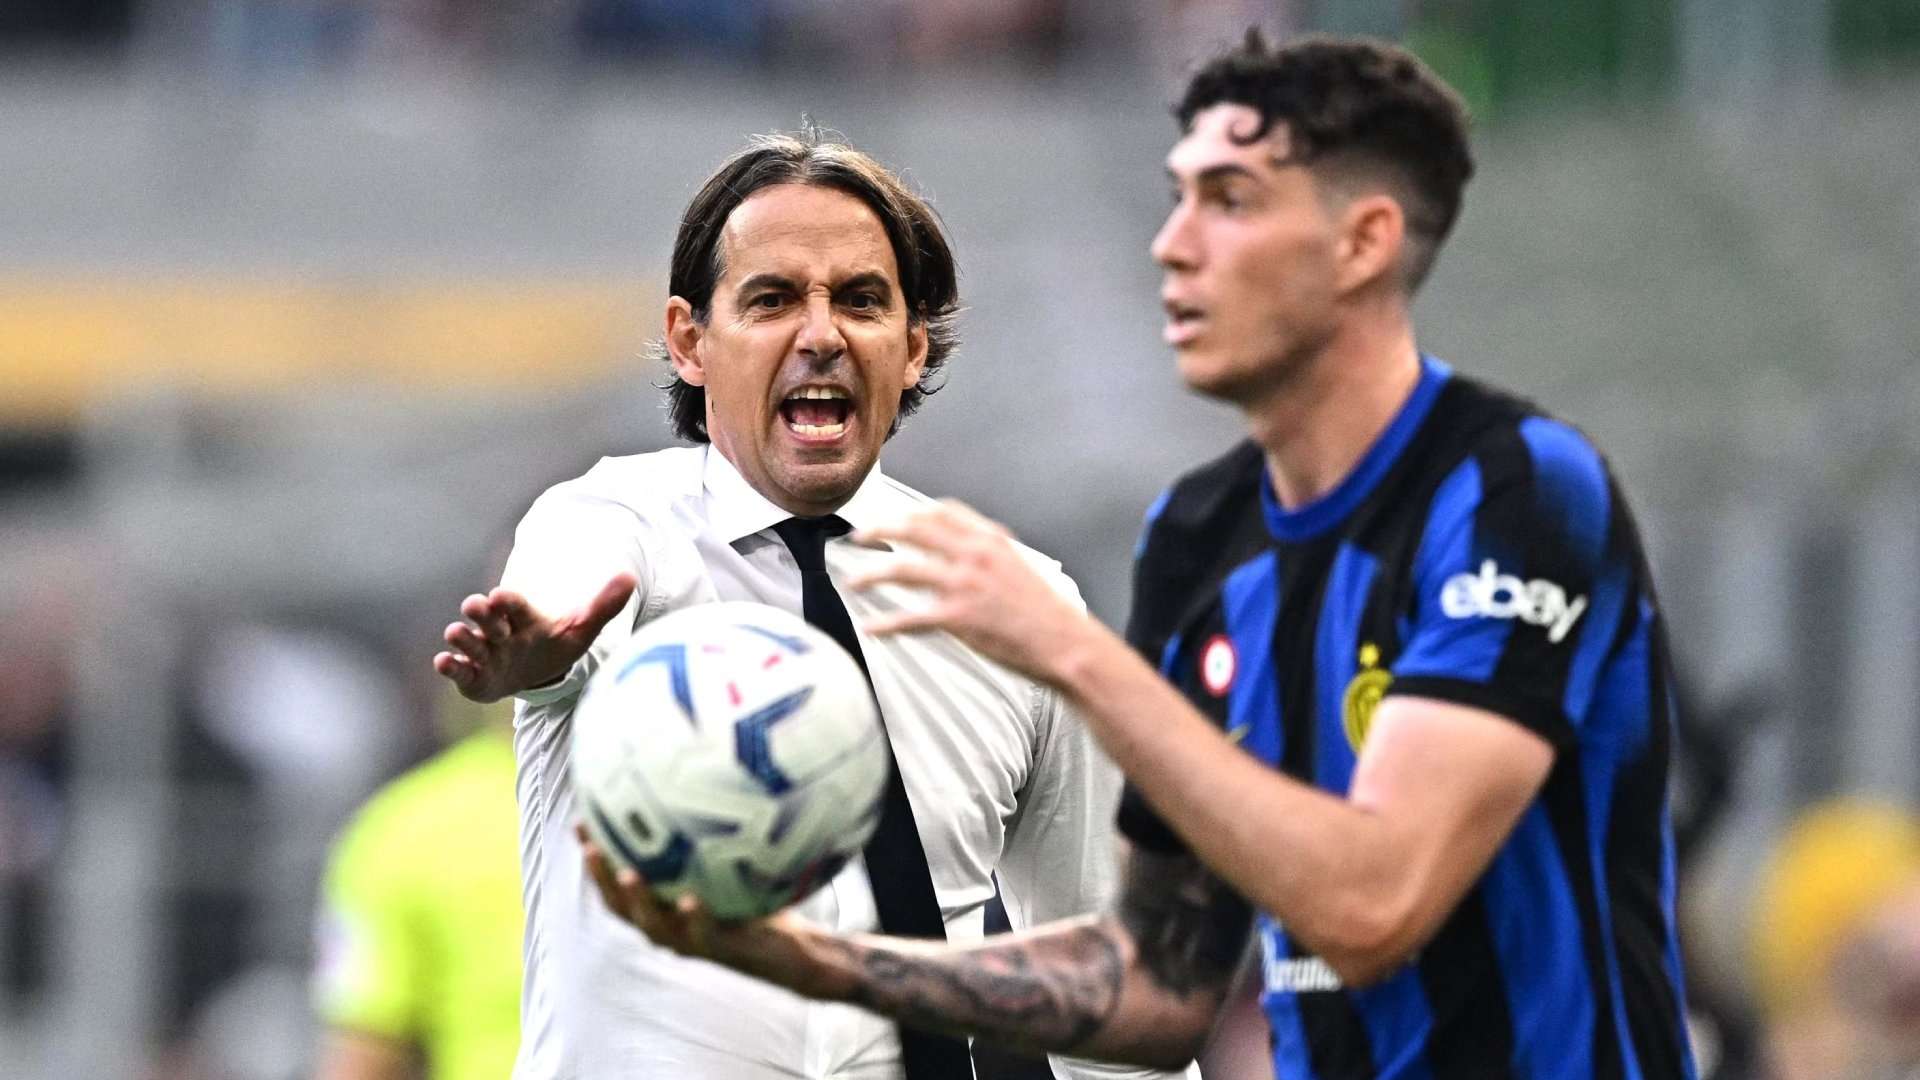 We lost bloody points!' - Simone Inzaghi furious as Inter throw two-goal lead to draw with Bologna and lose Serie A top spot | Goal.com US